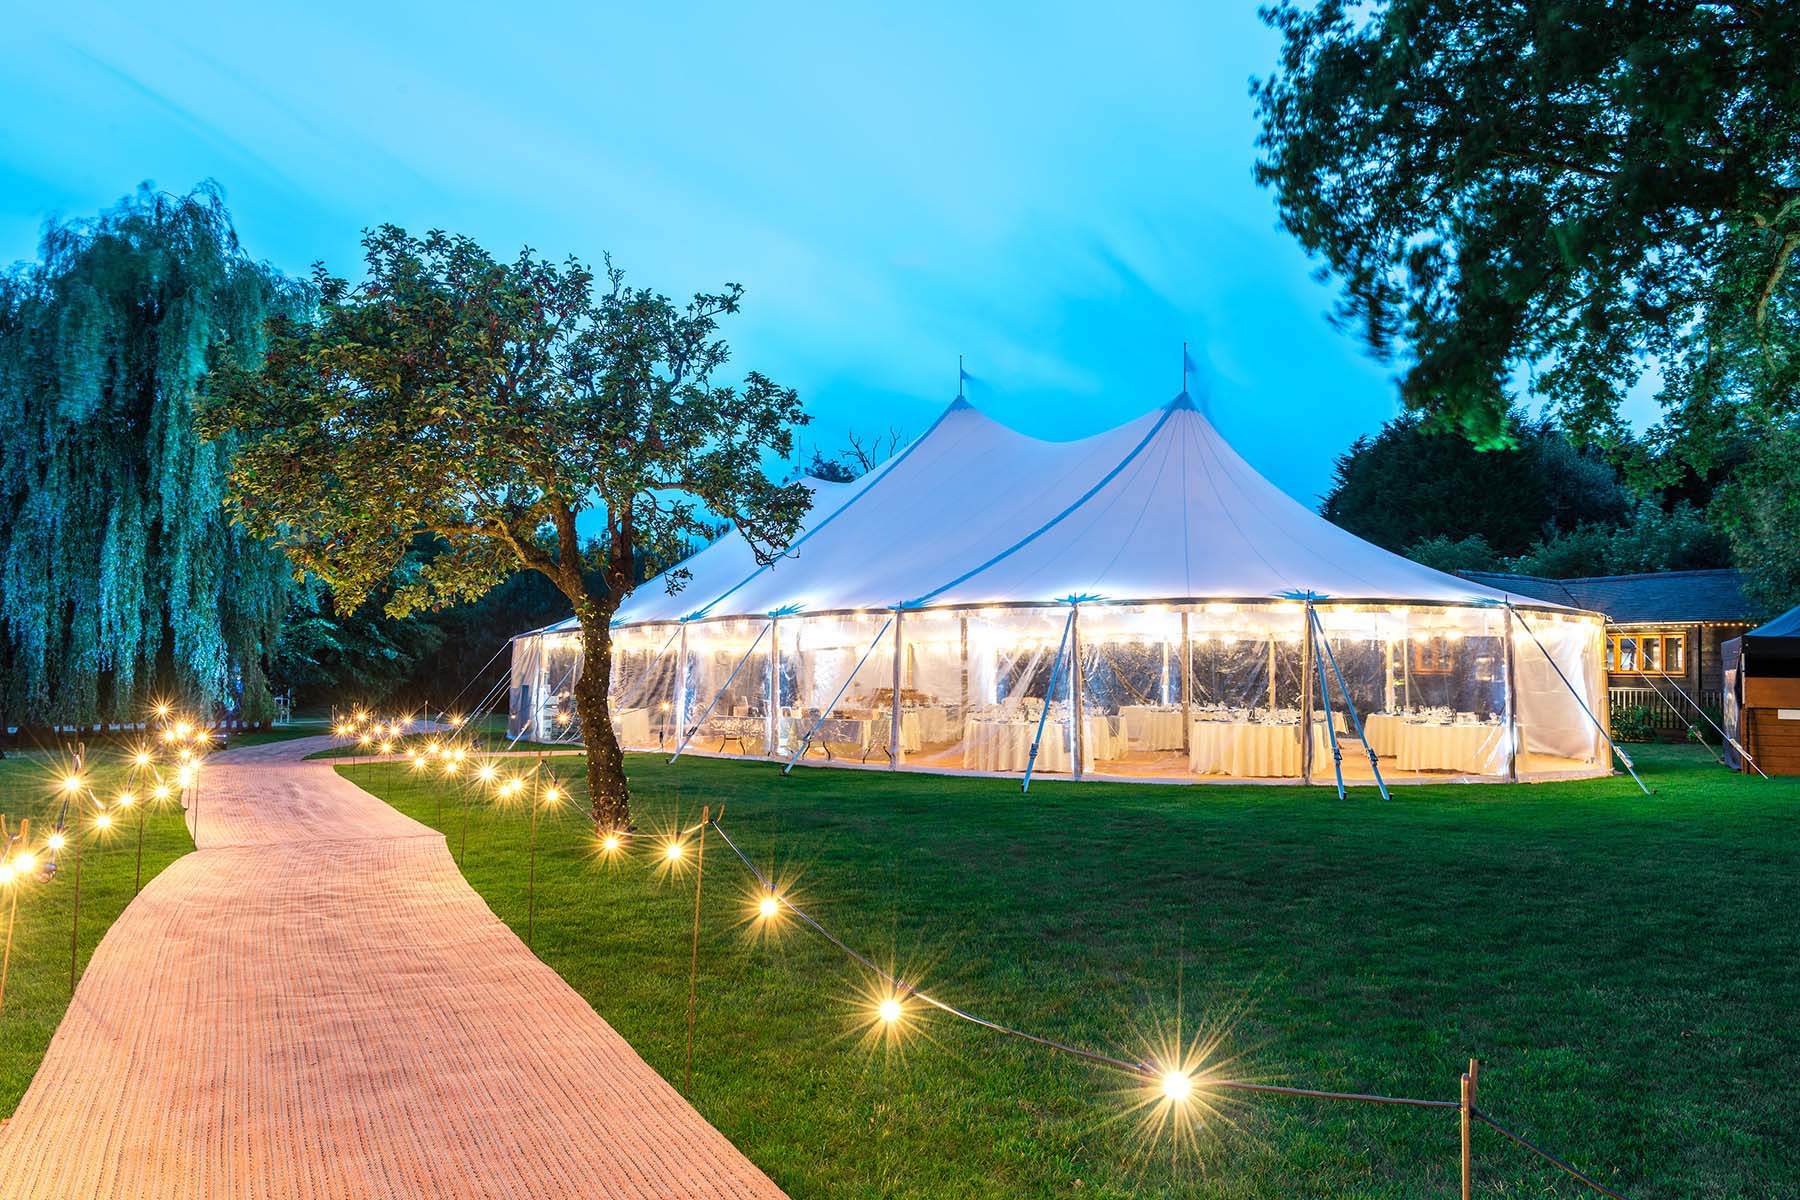 The exterior of a Sperry Tent at night with a festoon lighting walkway leading up to it.